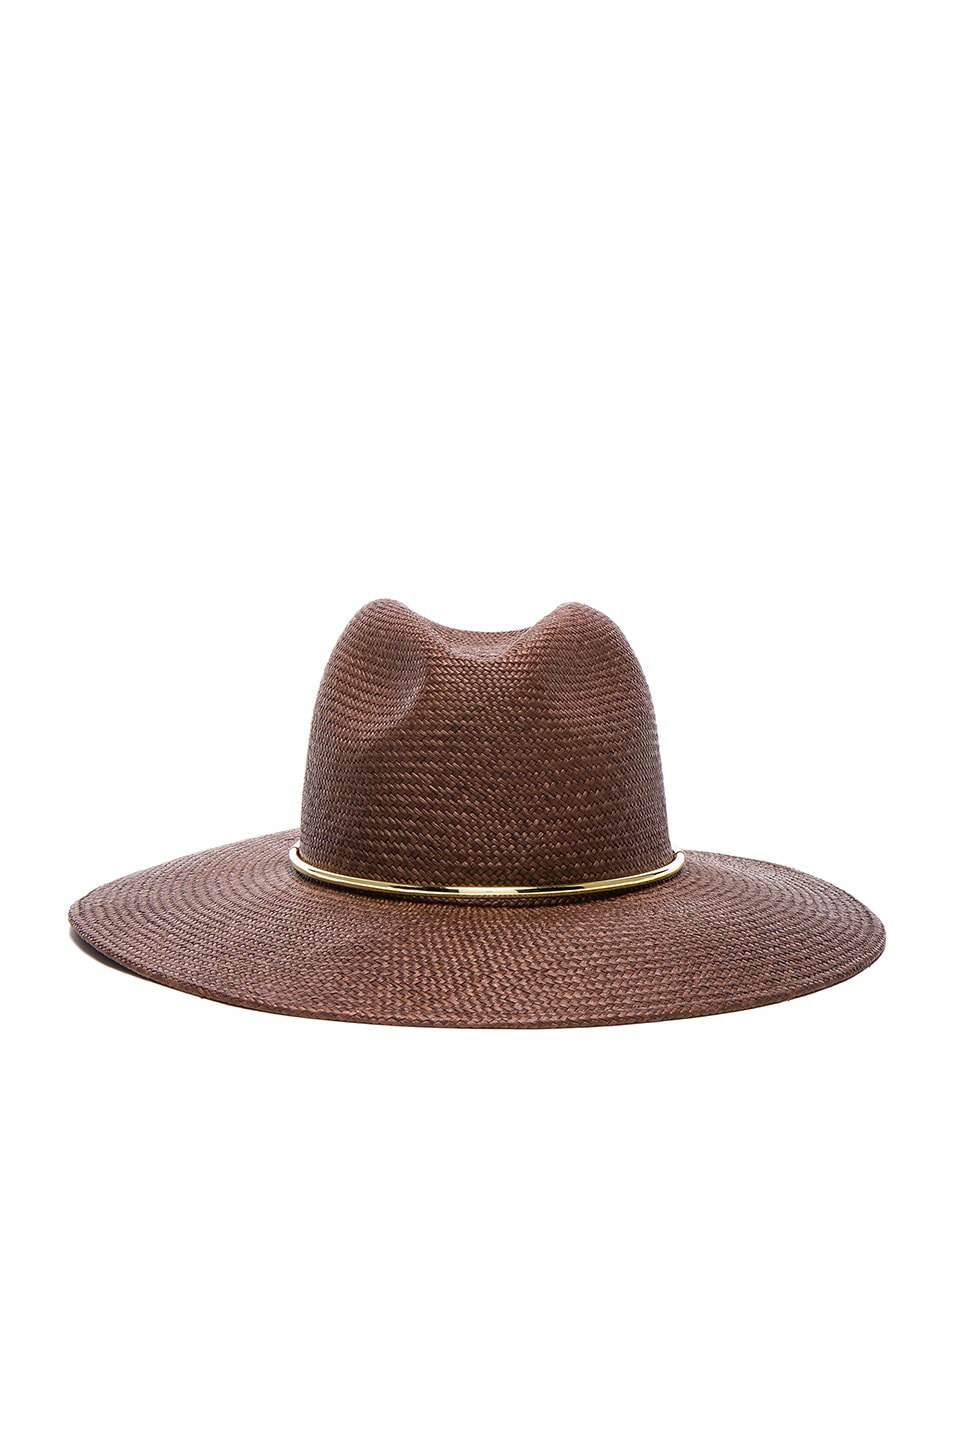 Image 1 of Janessa Leone FWRD Exclusive Agave Hat in Chestnut & Gold